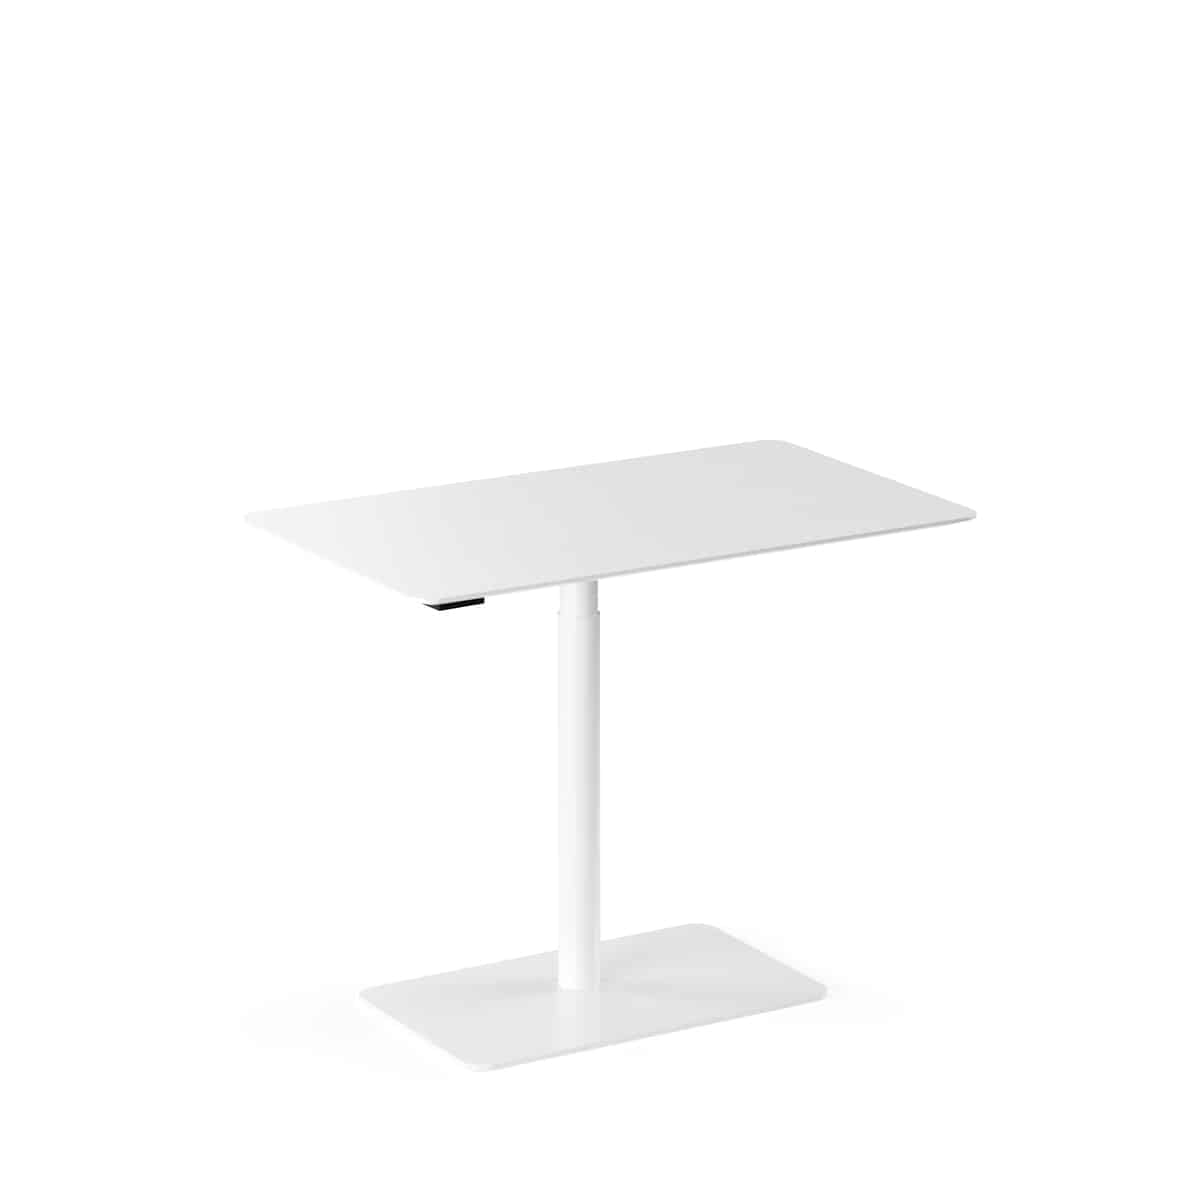 Bobby_sit_and_stand_table_100x60_04_Documents_jpg_1200_px